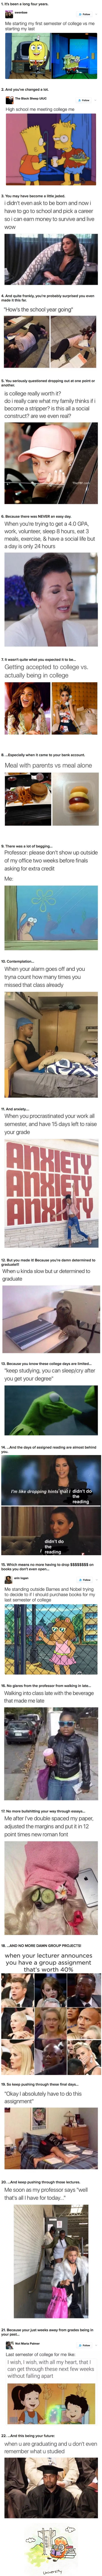 22 relatable situation you will understand if you’re about to graduate college